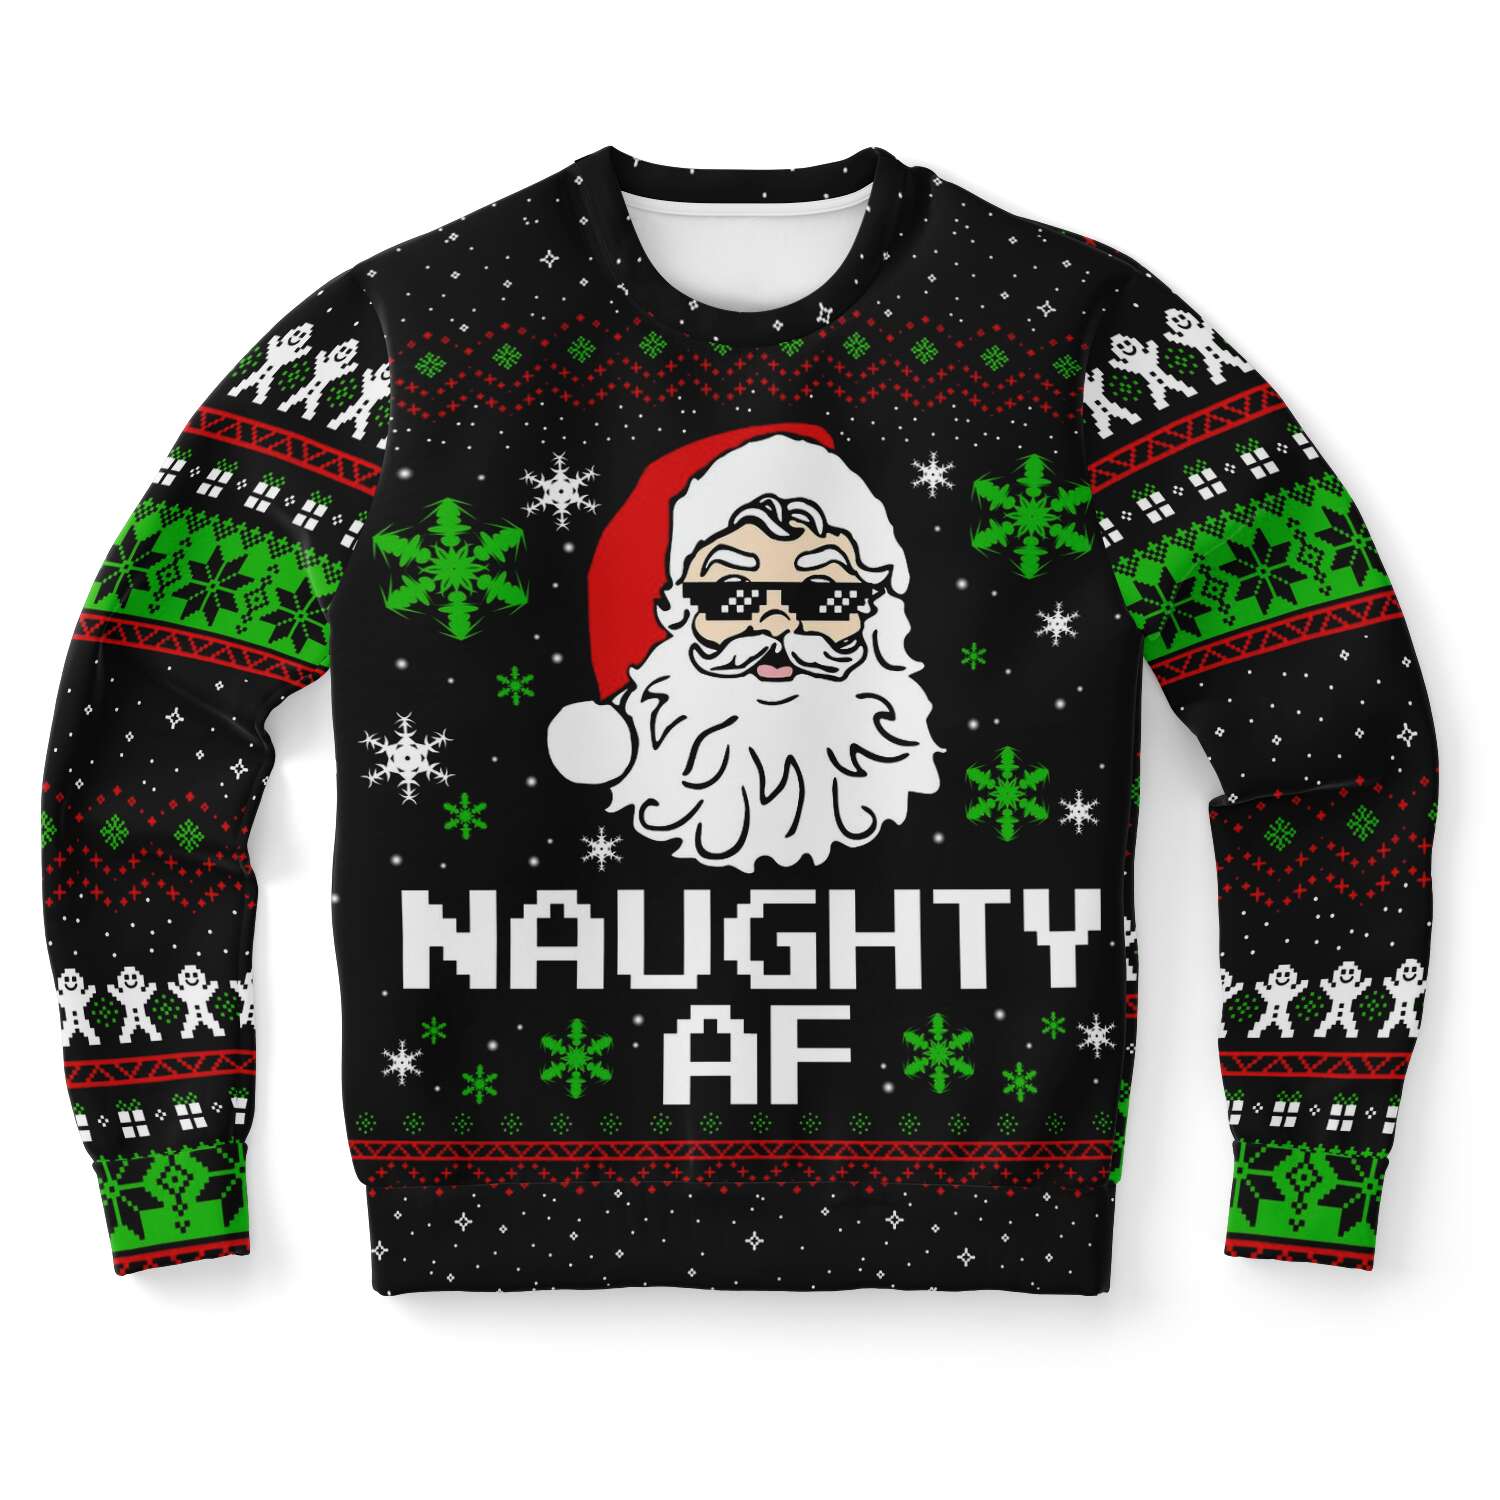 Naughty AF Sweater